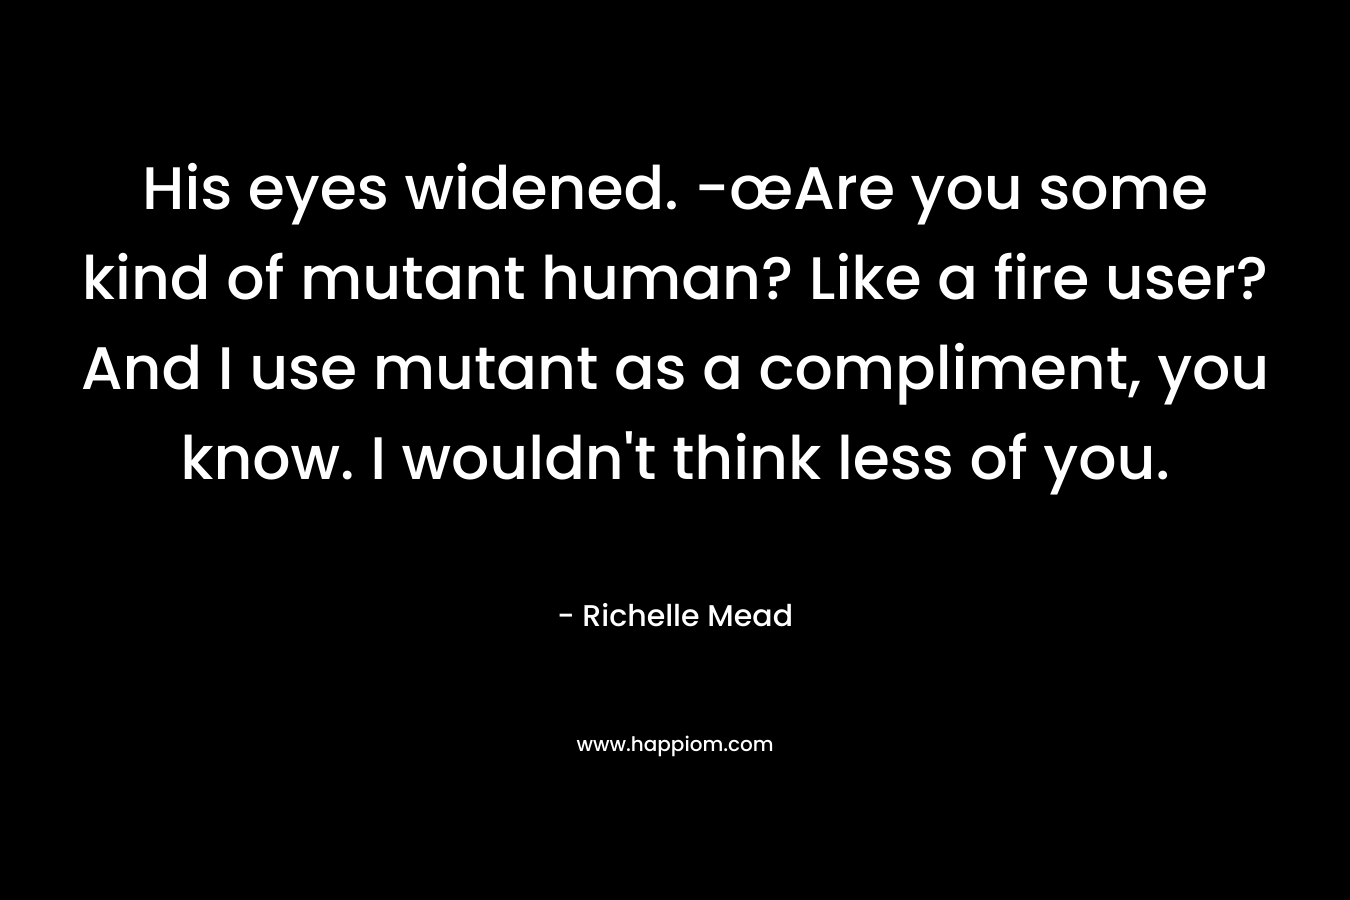 His eyes widened. -œAre you some kind of mutant human? Like a fire user? And I use mutant as a compliment, you know. I wouldn't think less of you.